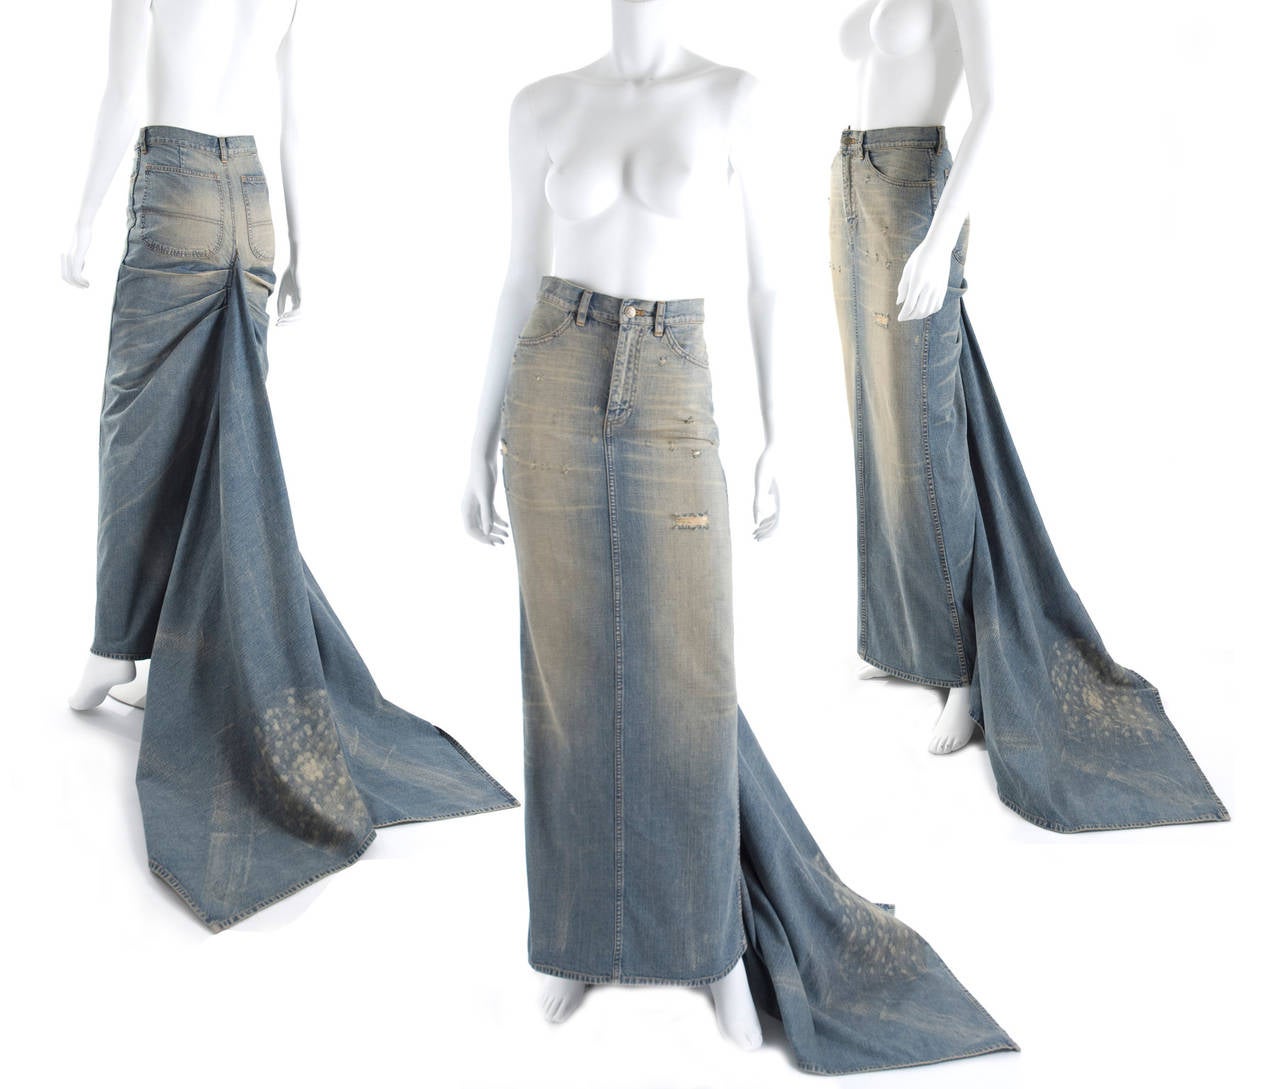 2003 Ralph Lauren Jeans Skirt with Train.
The skirt is AMAZING - lightweight, distressed denim designed with an train!
As seen on Mariah Carey.
Size US 6

Measurements:
Length front 43